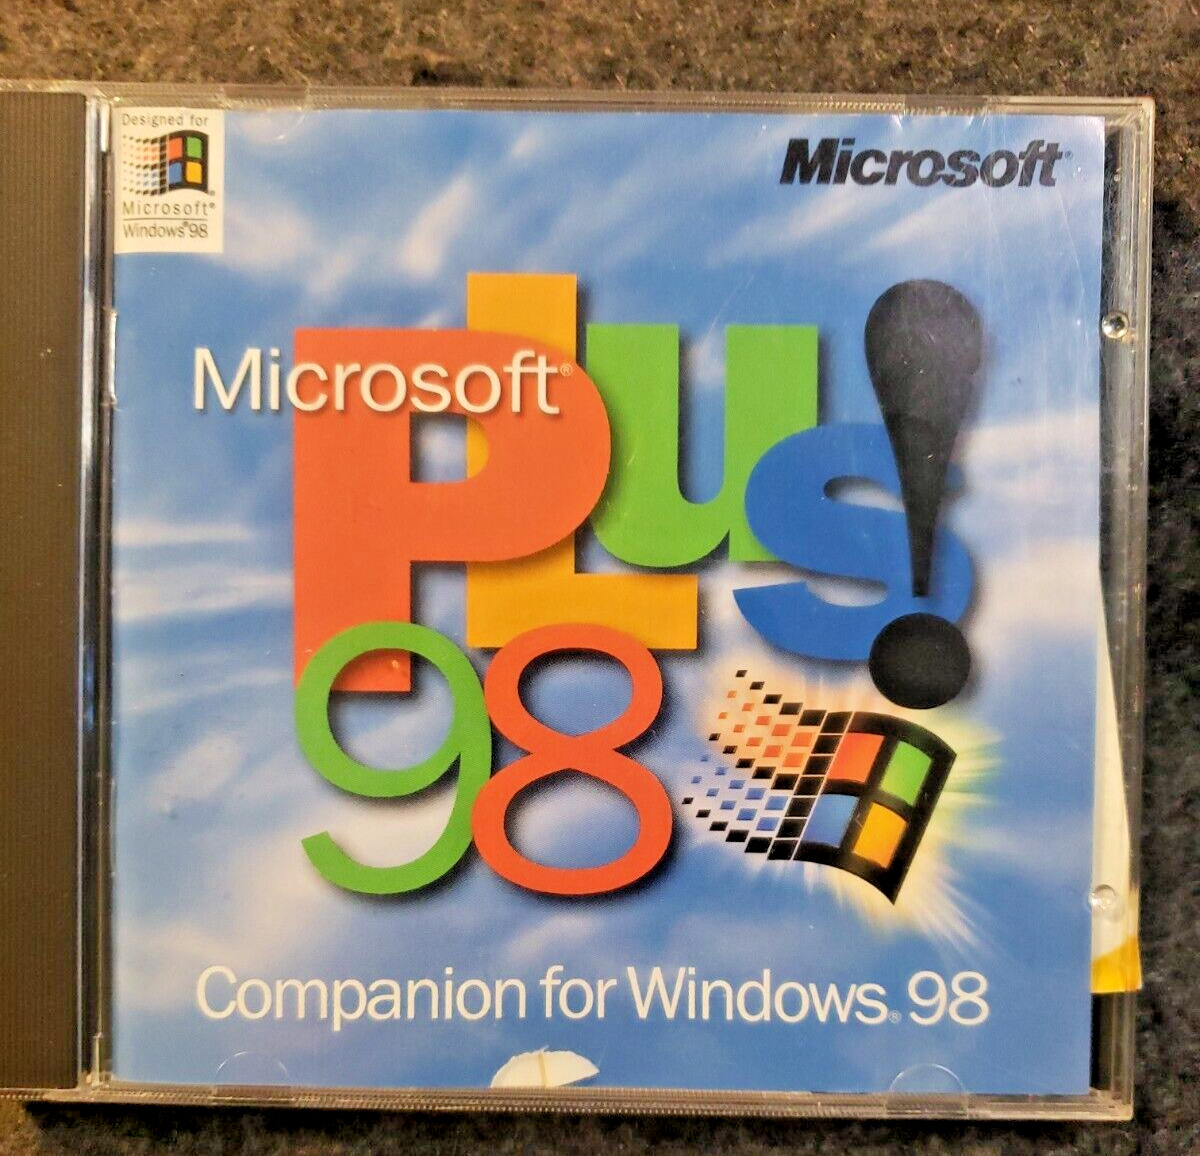 Microsoft Plus 98 Software Companion disk  for Windows 98 with Key  (C19B3)